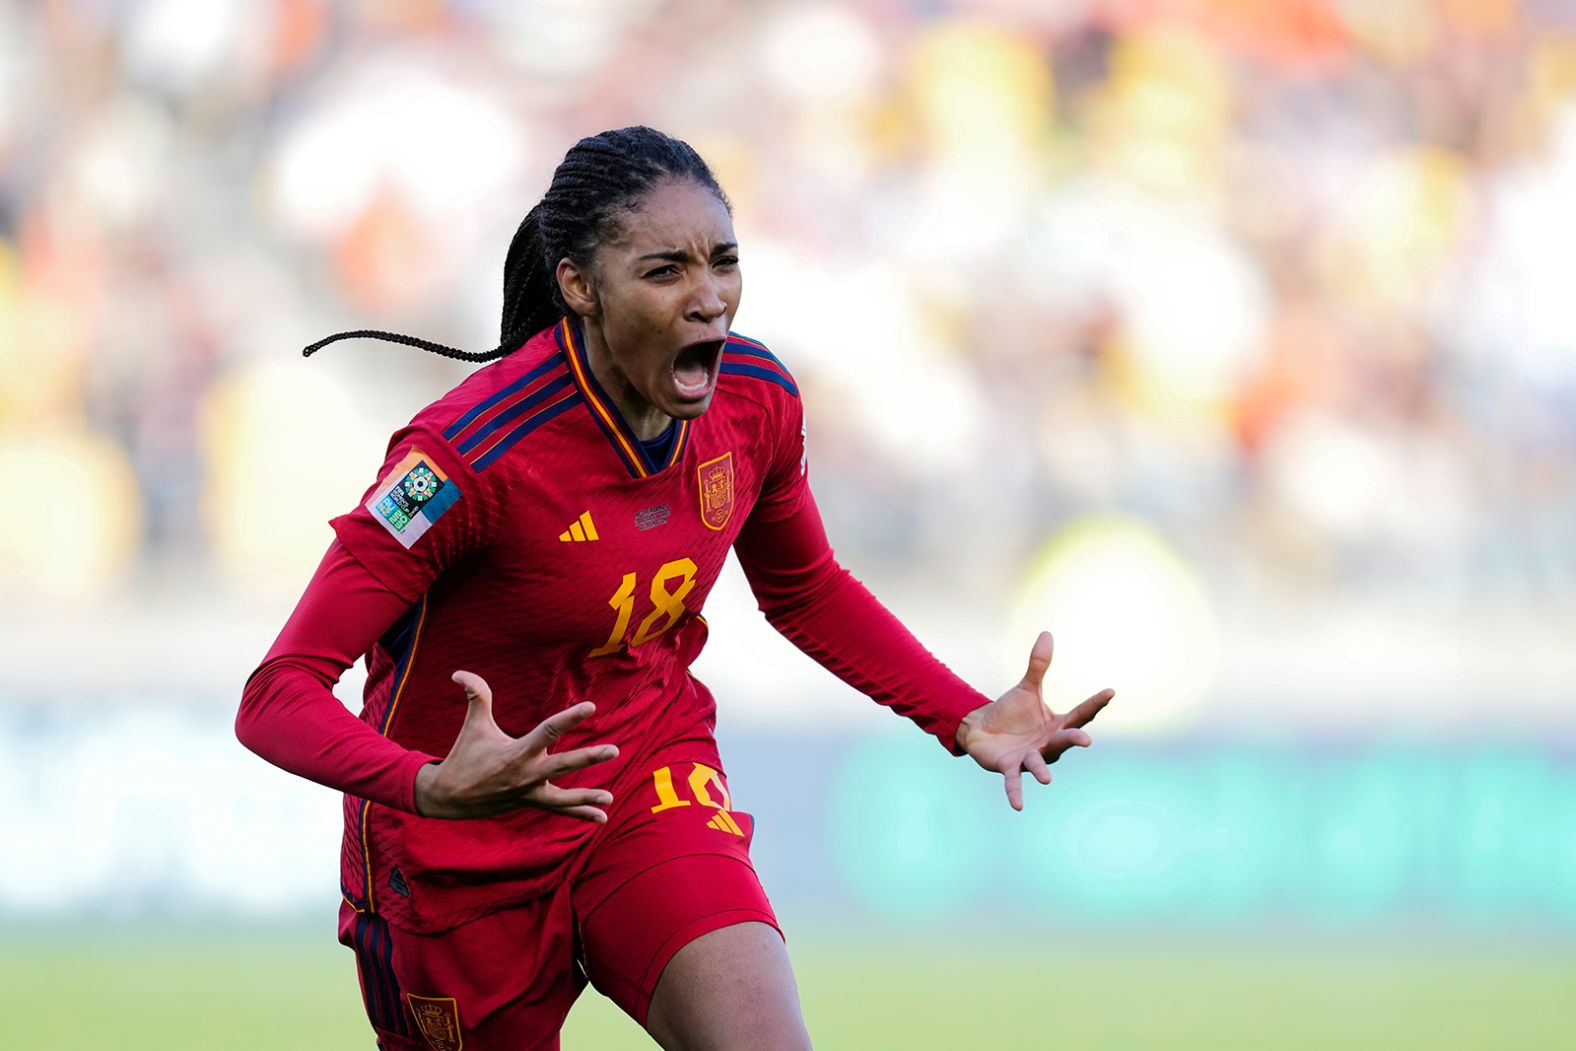 Spain's Salma Paralluelo celebrates after scoring in extra time during the quarterfinal clash against the Netherlands on August 11. It ended up being the winning goal as <a href="index.php?page=&url=https%3A%2F%2Fwww.cnn.com%2F2023%2F08%2F10%2Ffootball%2Fspain-netherlands-japan-sweden-womens-world-cup-quarterfinals-spt-intl%2Findex.html" target="_blank">Spain advanced with a 2-1 victory</a>.